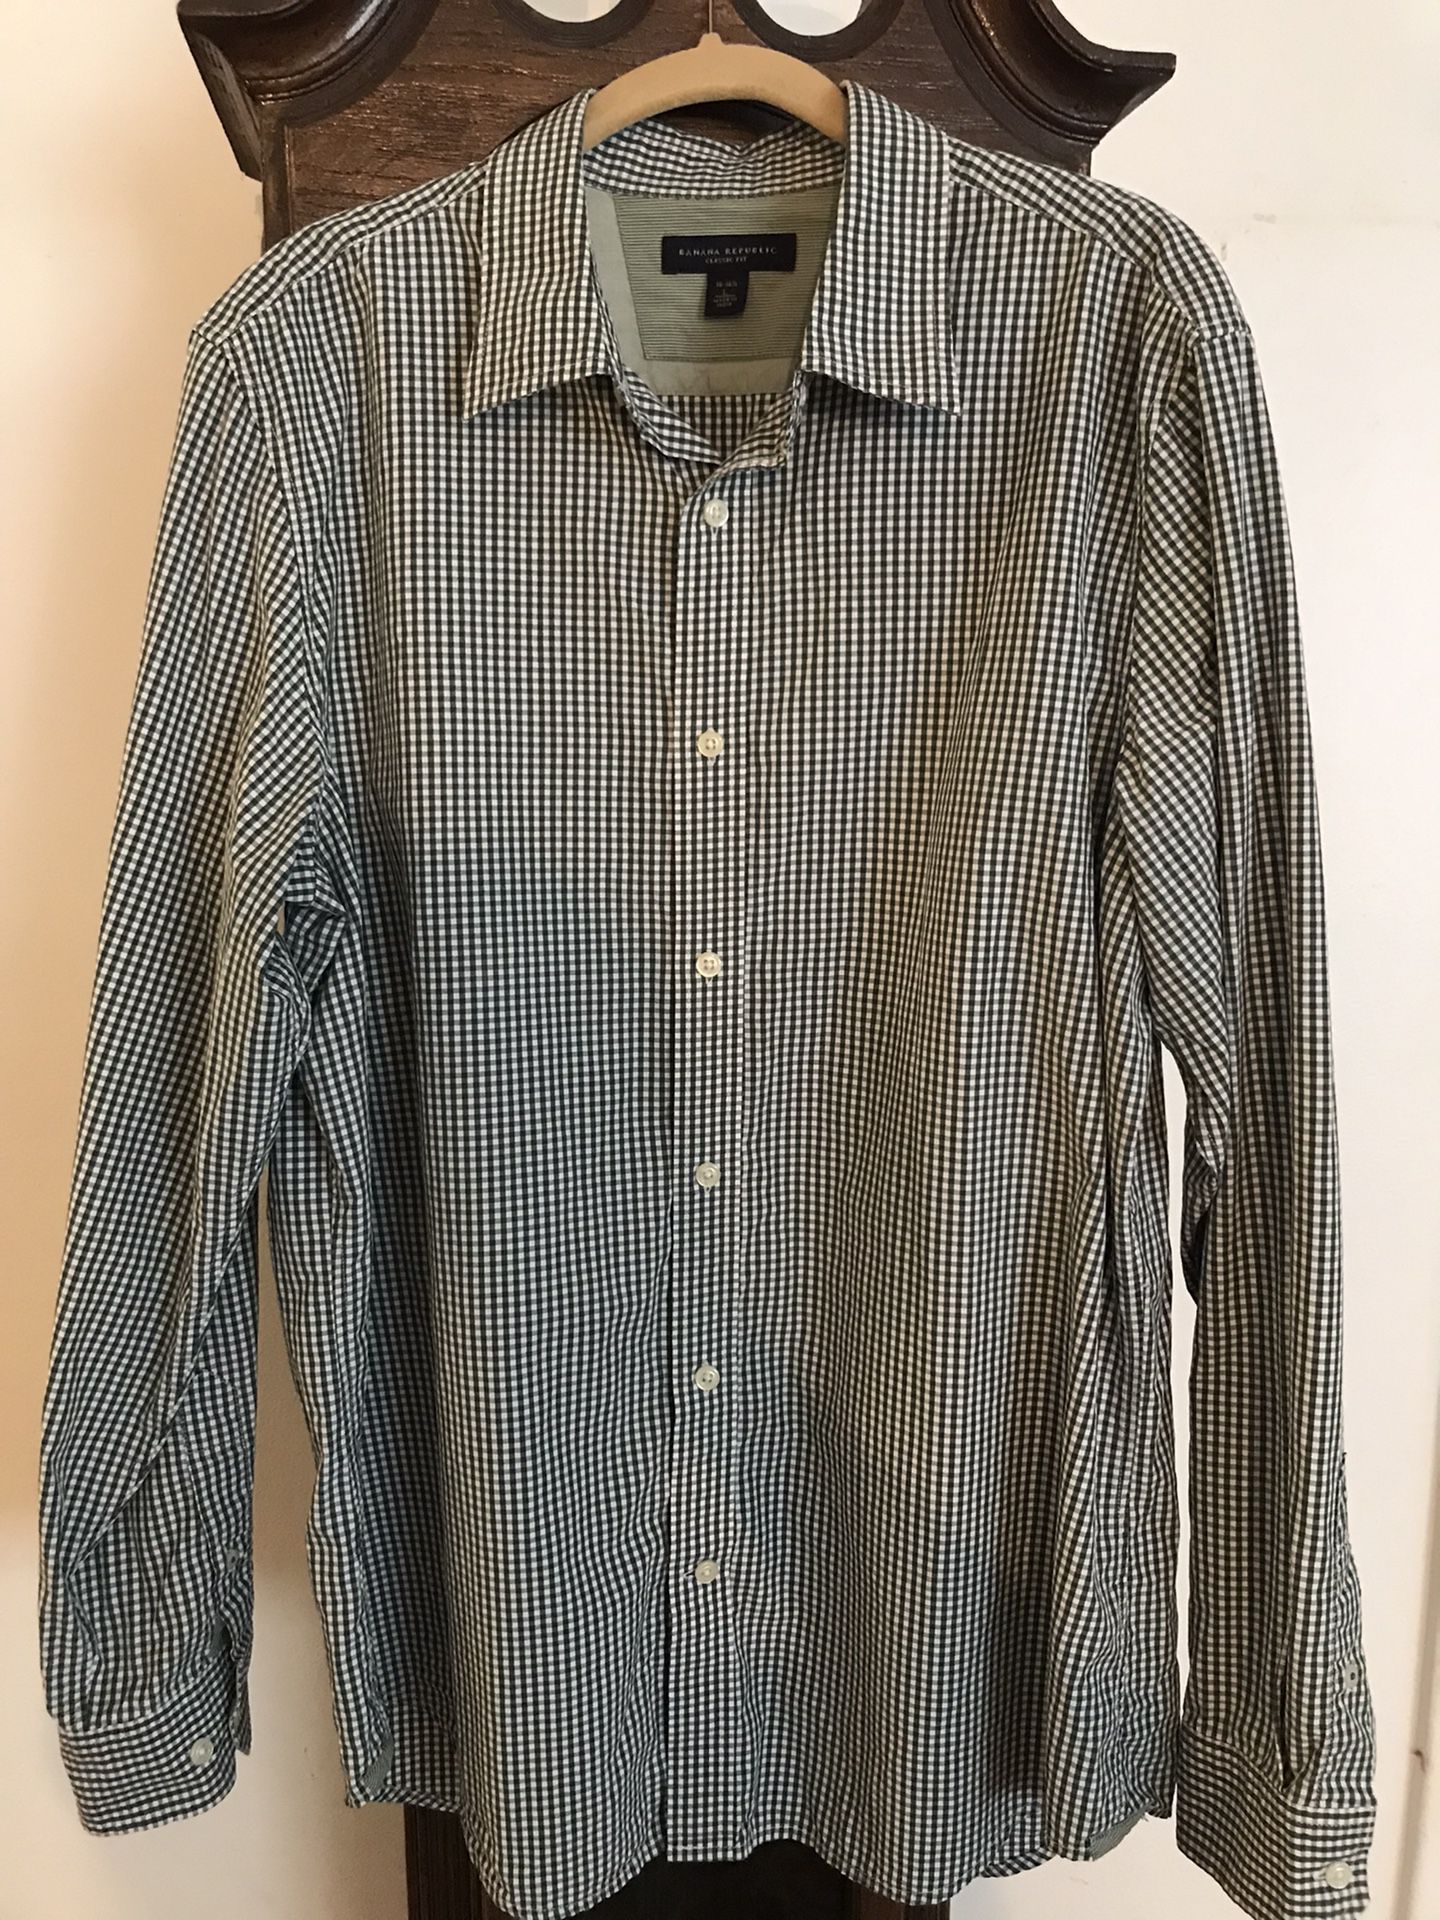 Men’s Banana Republic 100% Cotton Green And White Checked Dress/Casual Shirt  - Size Large 16-16 1/2